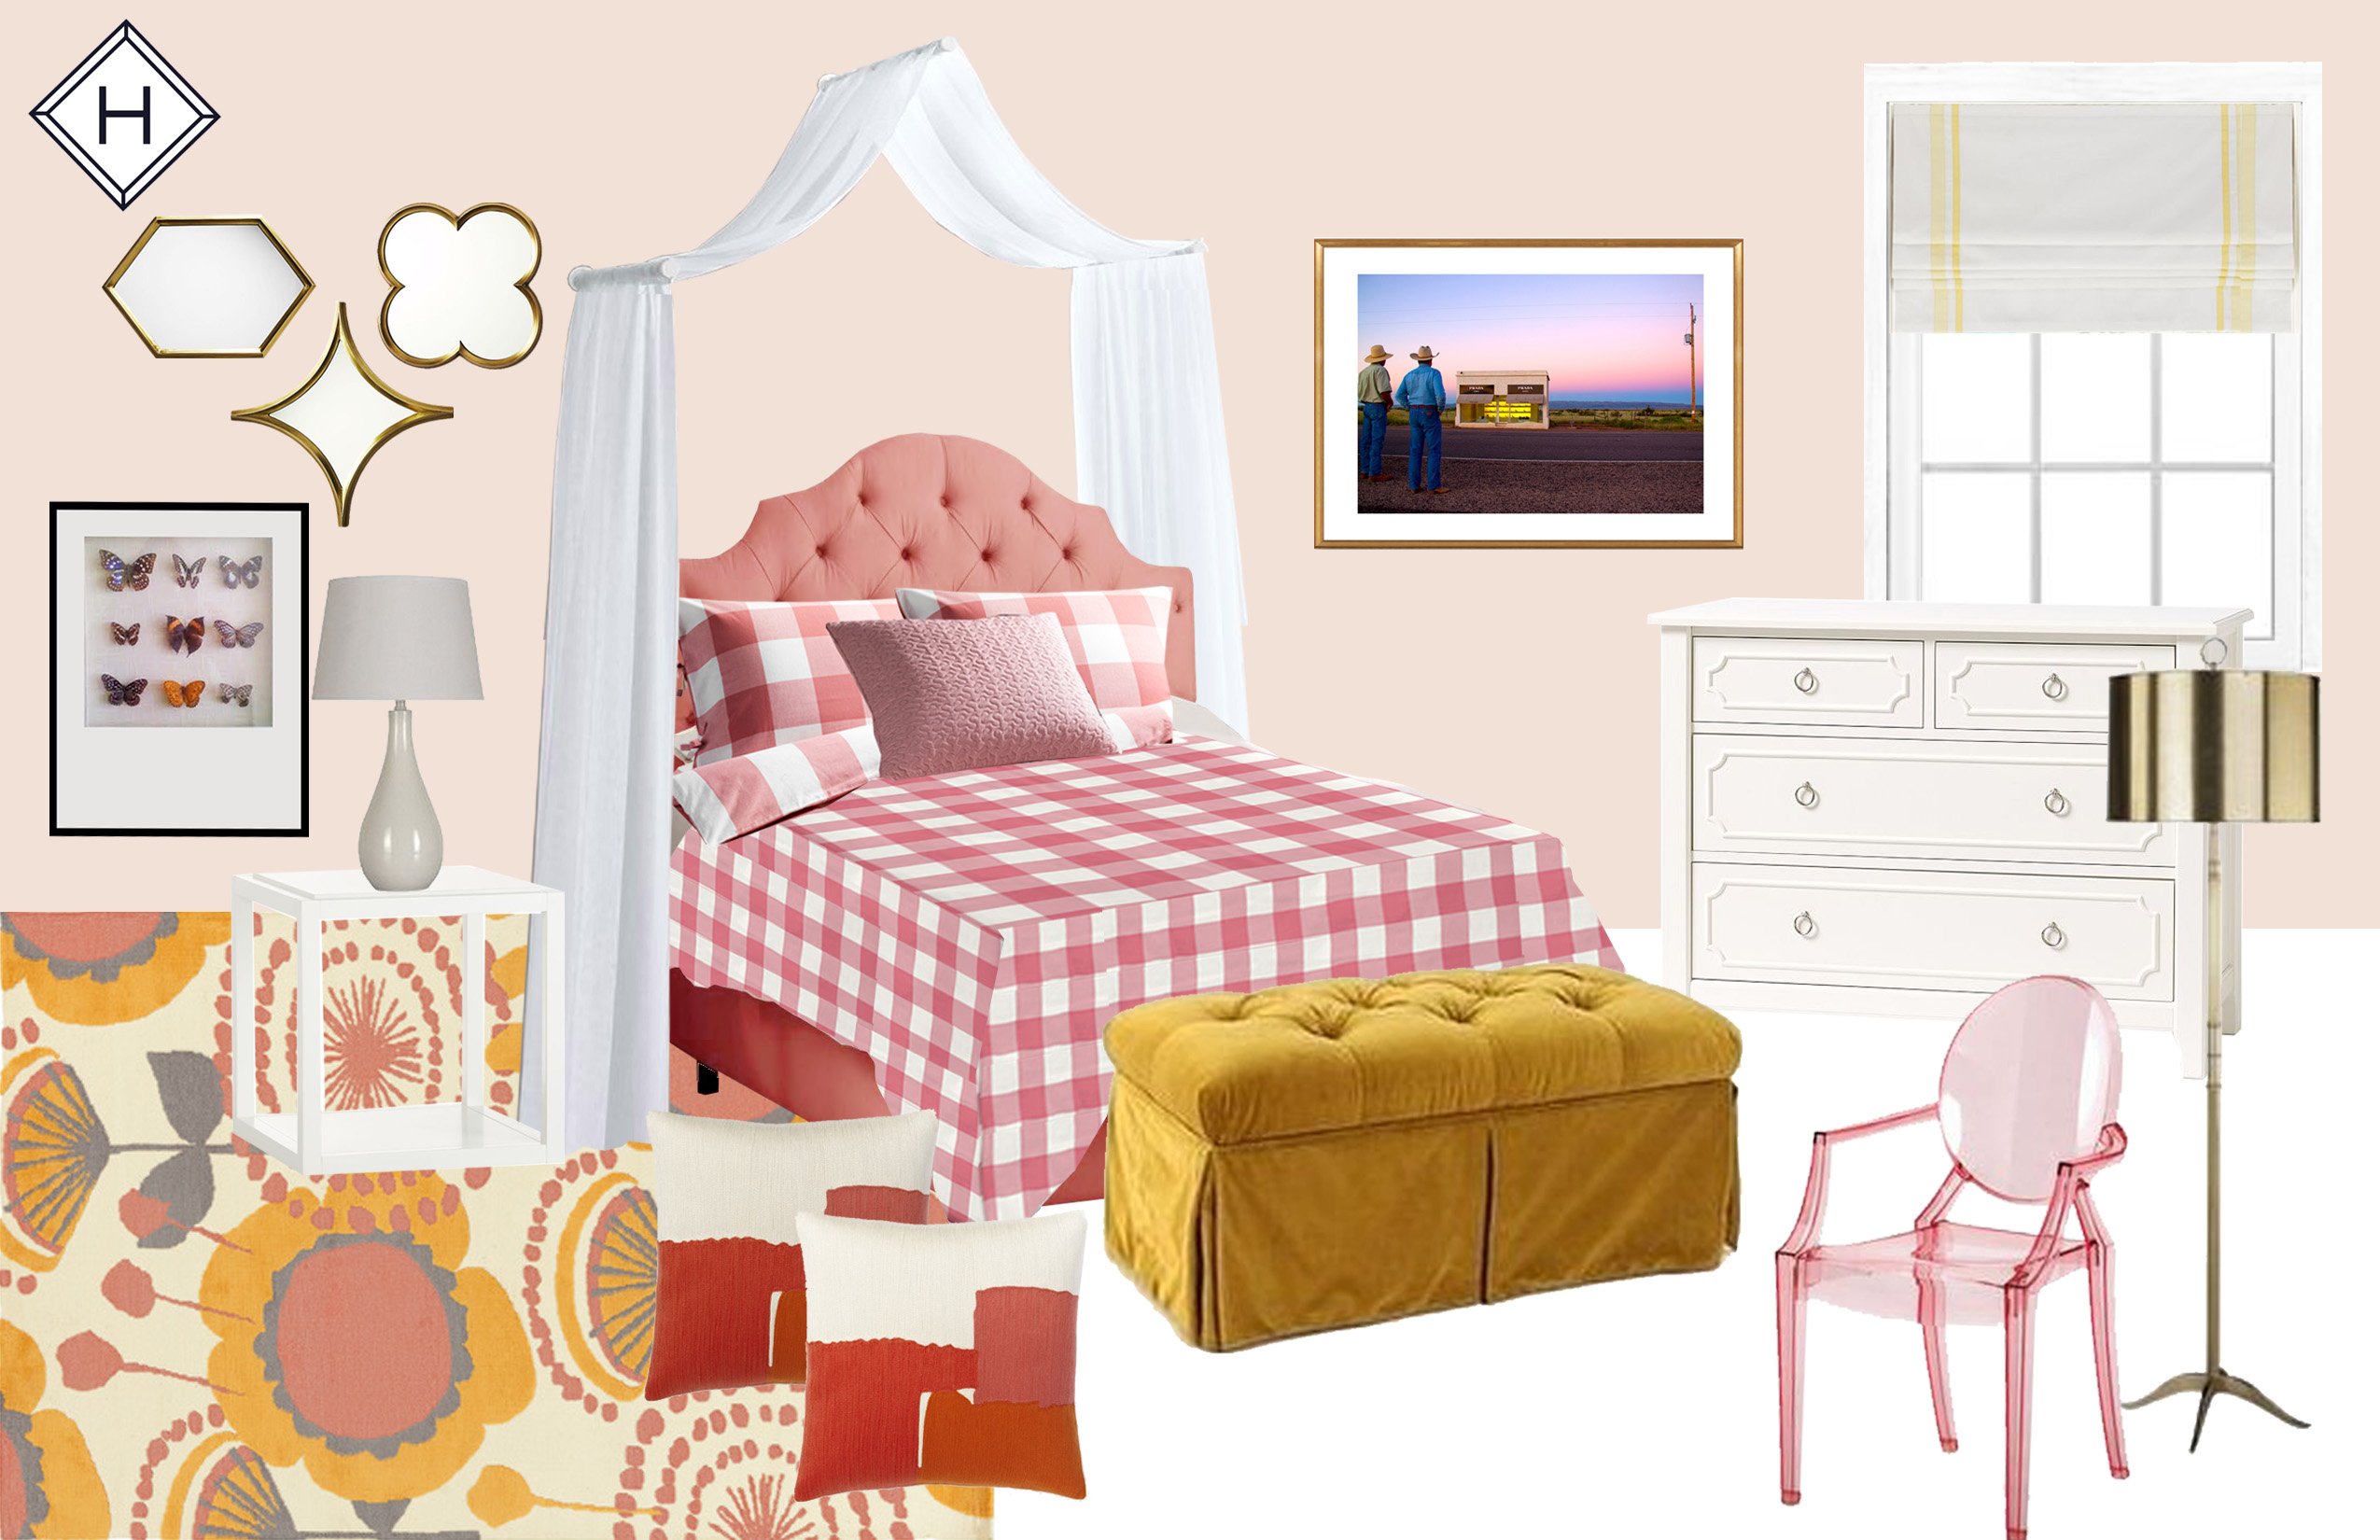 A Whimsical Girls Bedroom Design by Havenly